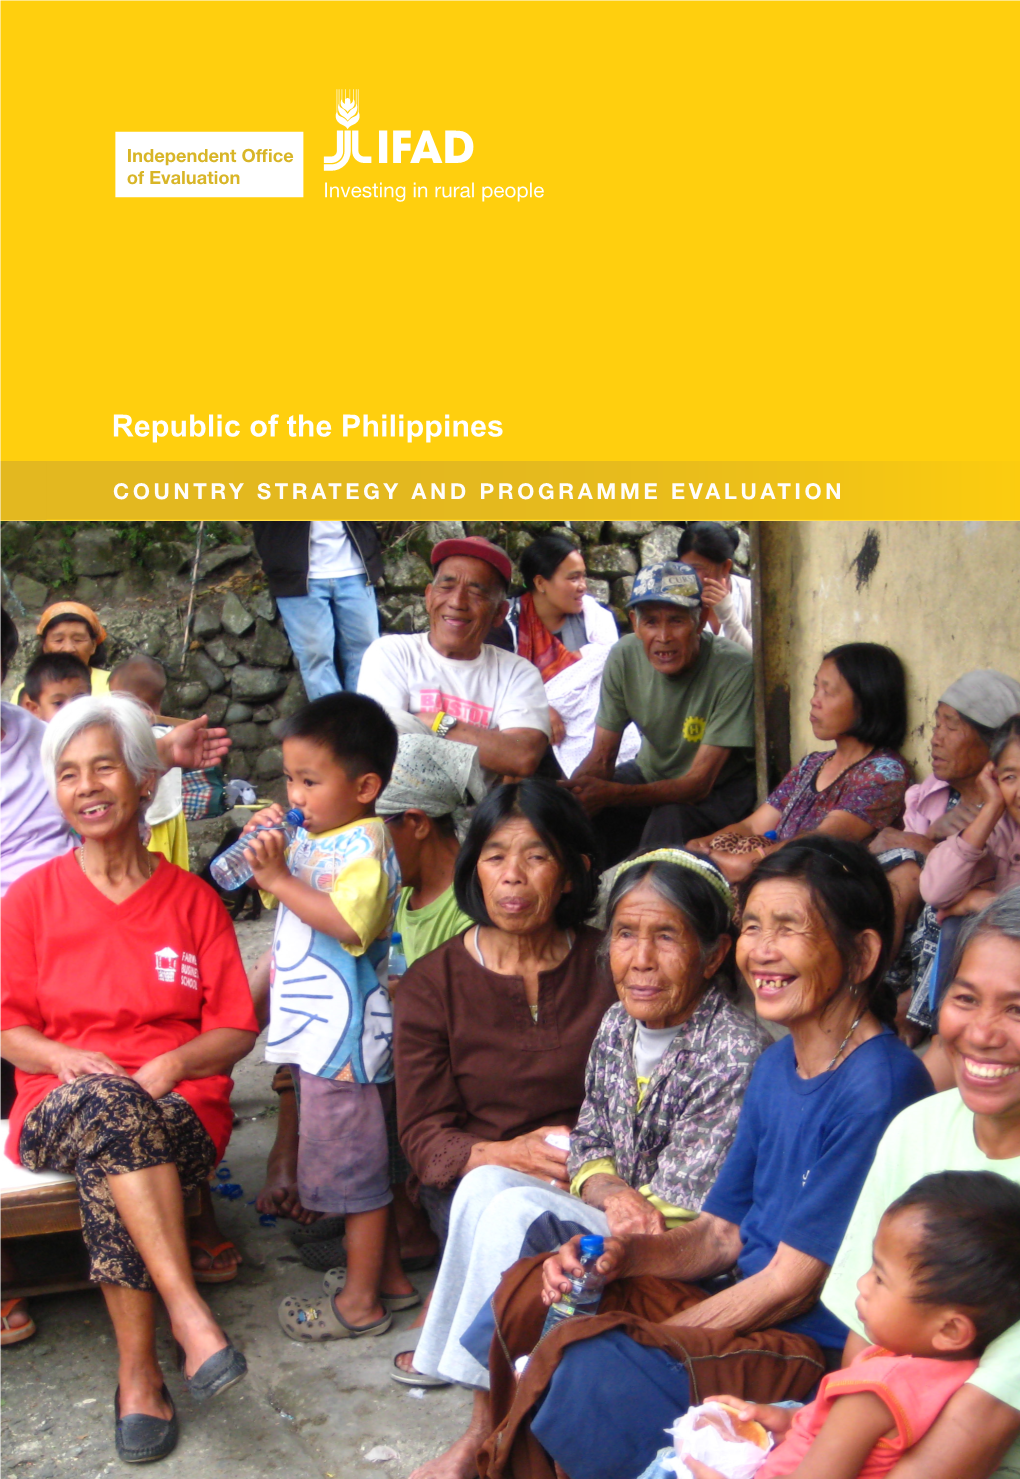 Republic of the Philippines COUNTRY STRATEGY and PROGRAMME EVALUATION